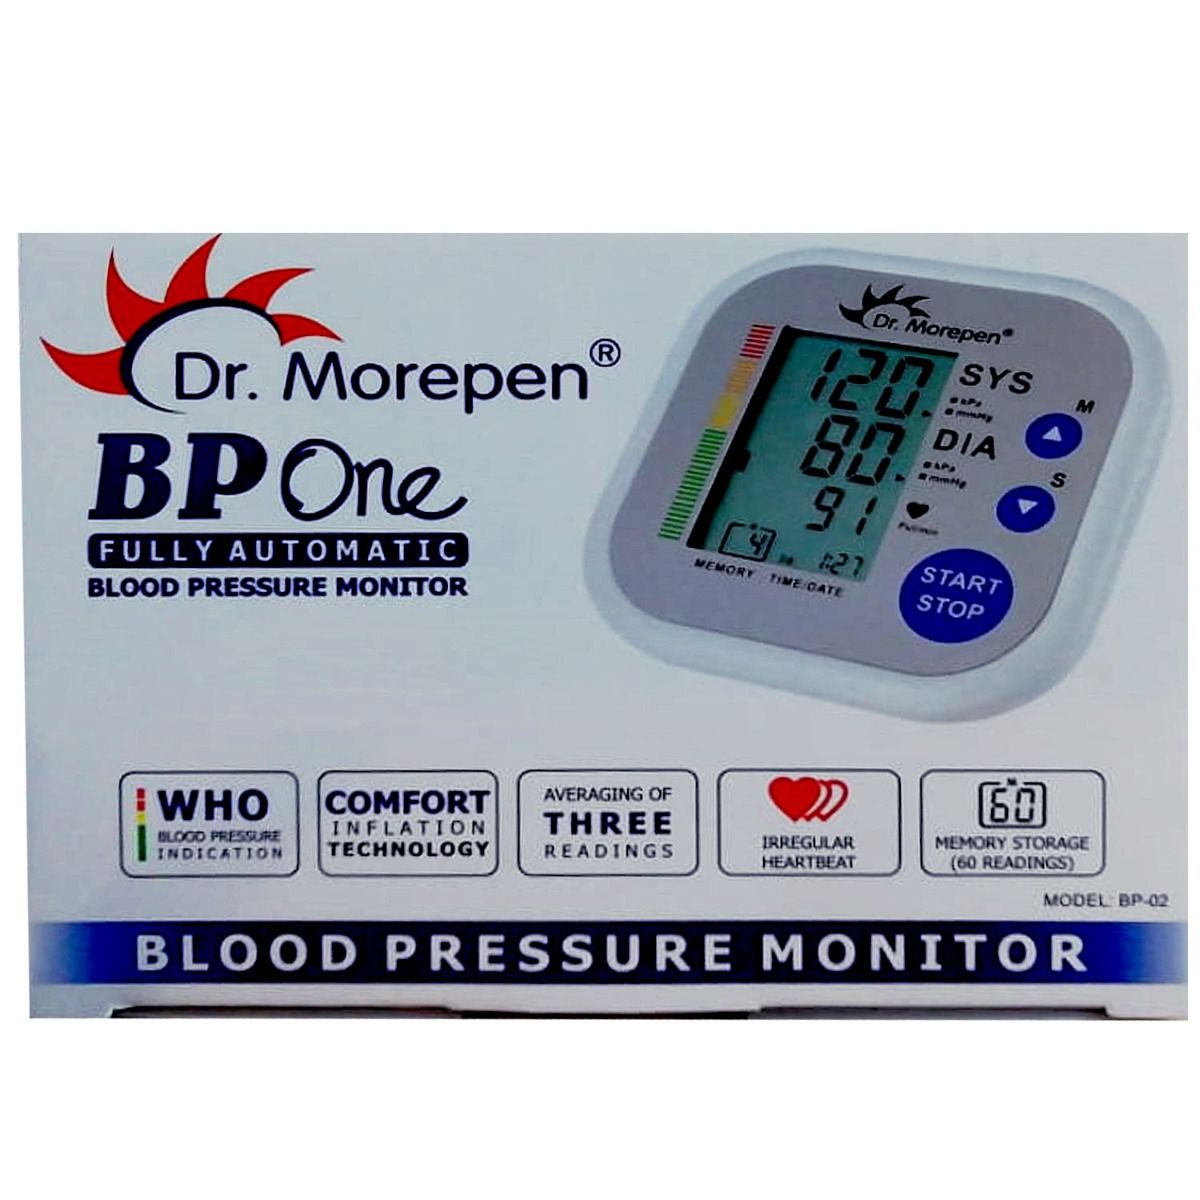 Buy Dr. Morepen BP One Fully Automatic Blood Pressure Monitor BP-02, 1 Count Online